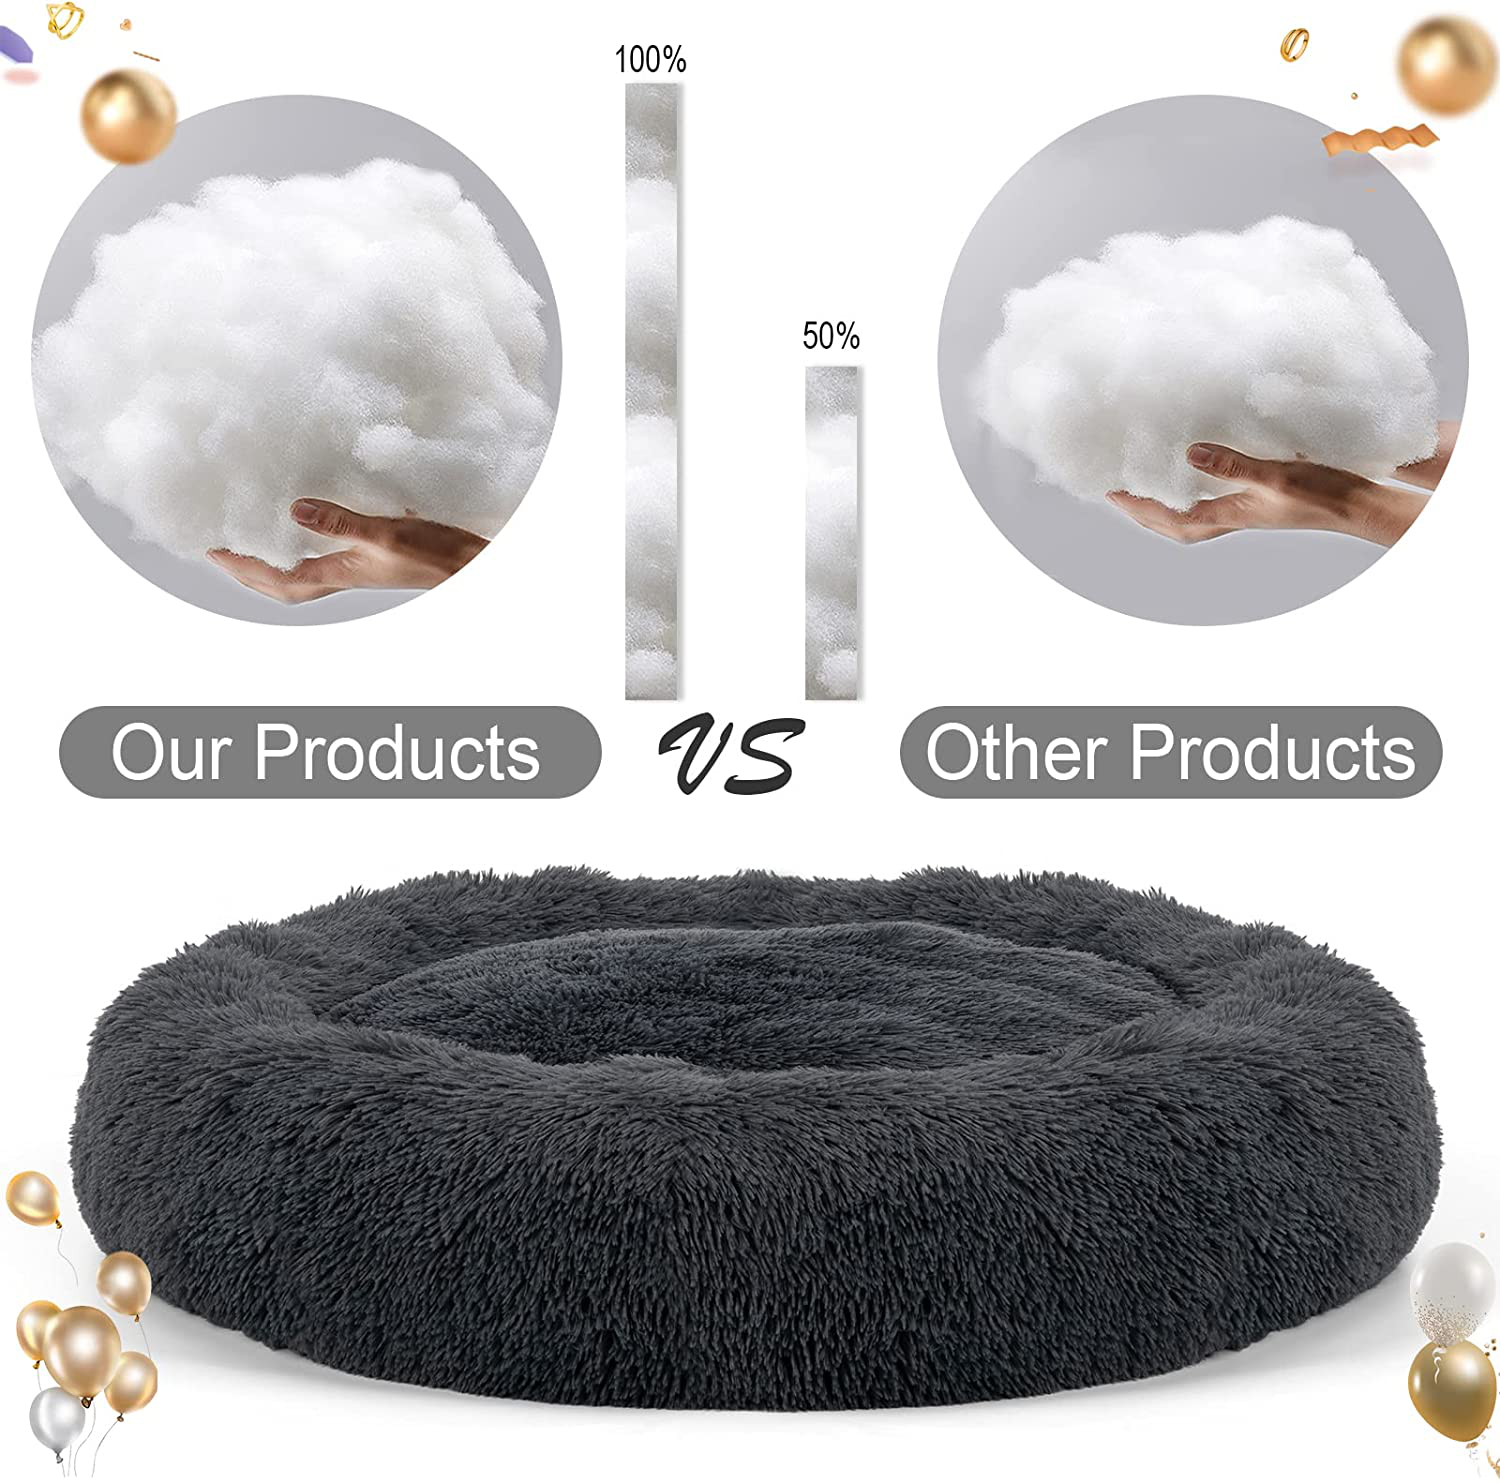 Dog Bed, Calming Cat Bed, Upgraded Thick Pet Donut Cuddler, Detachable Washable Cozy Bed with Anti-Slip & Water-Resistant Bottom, Pet Cushion Bed for Small Medium Large X-Large Dog or Cat